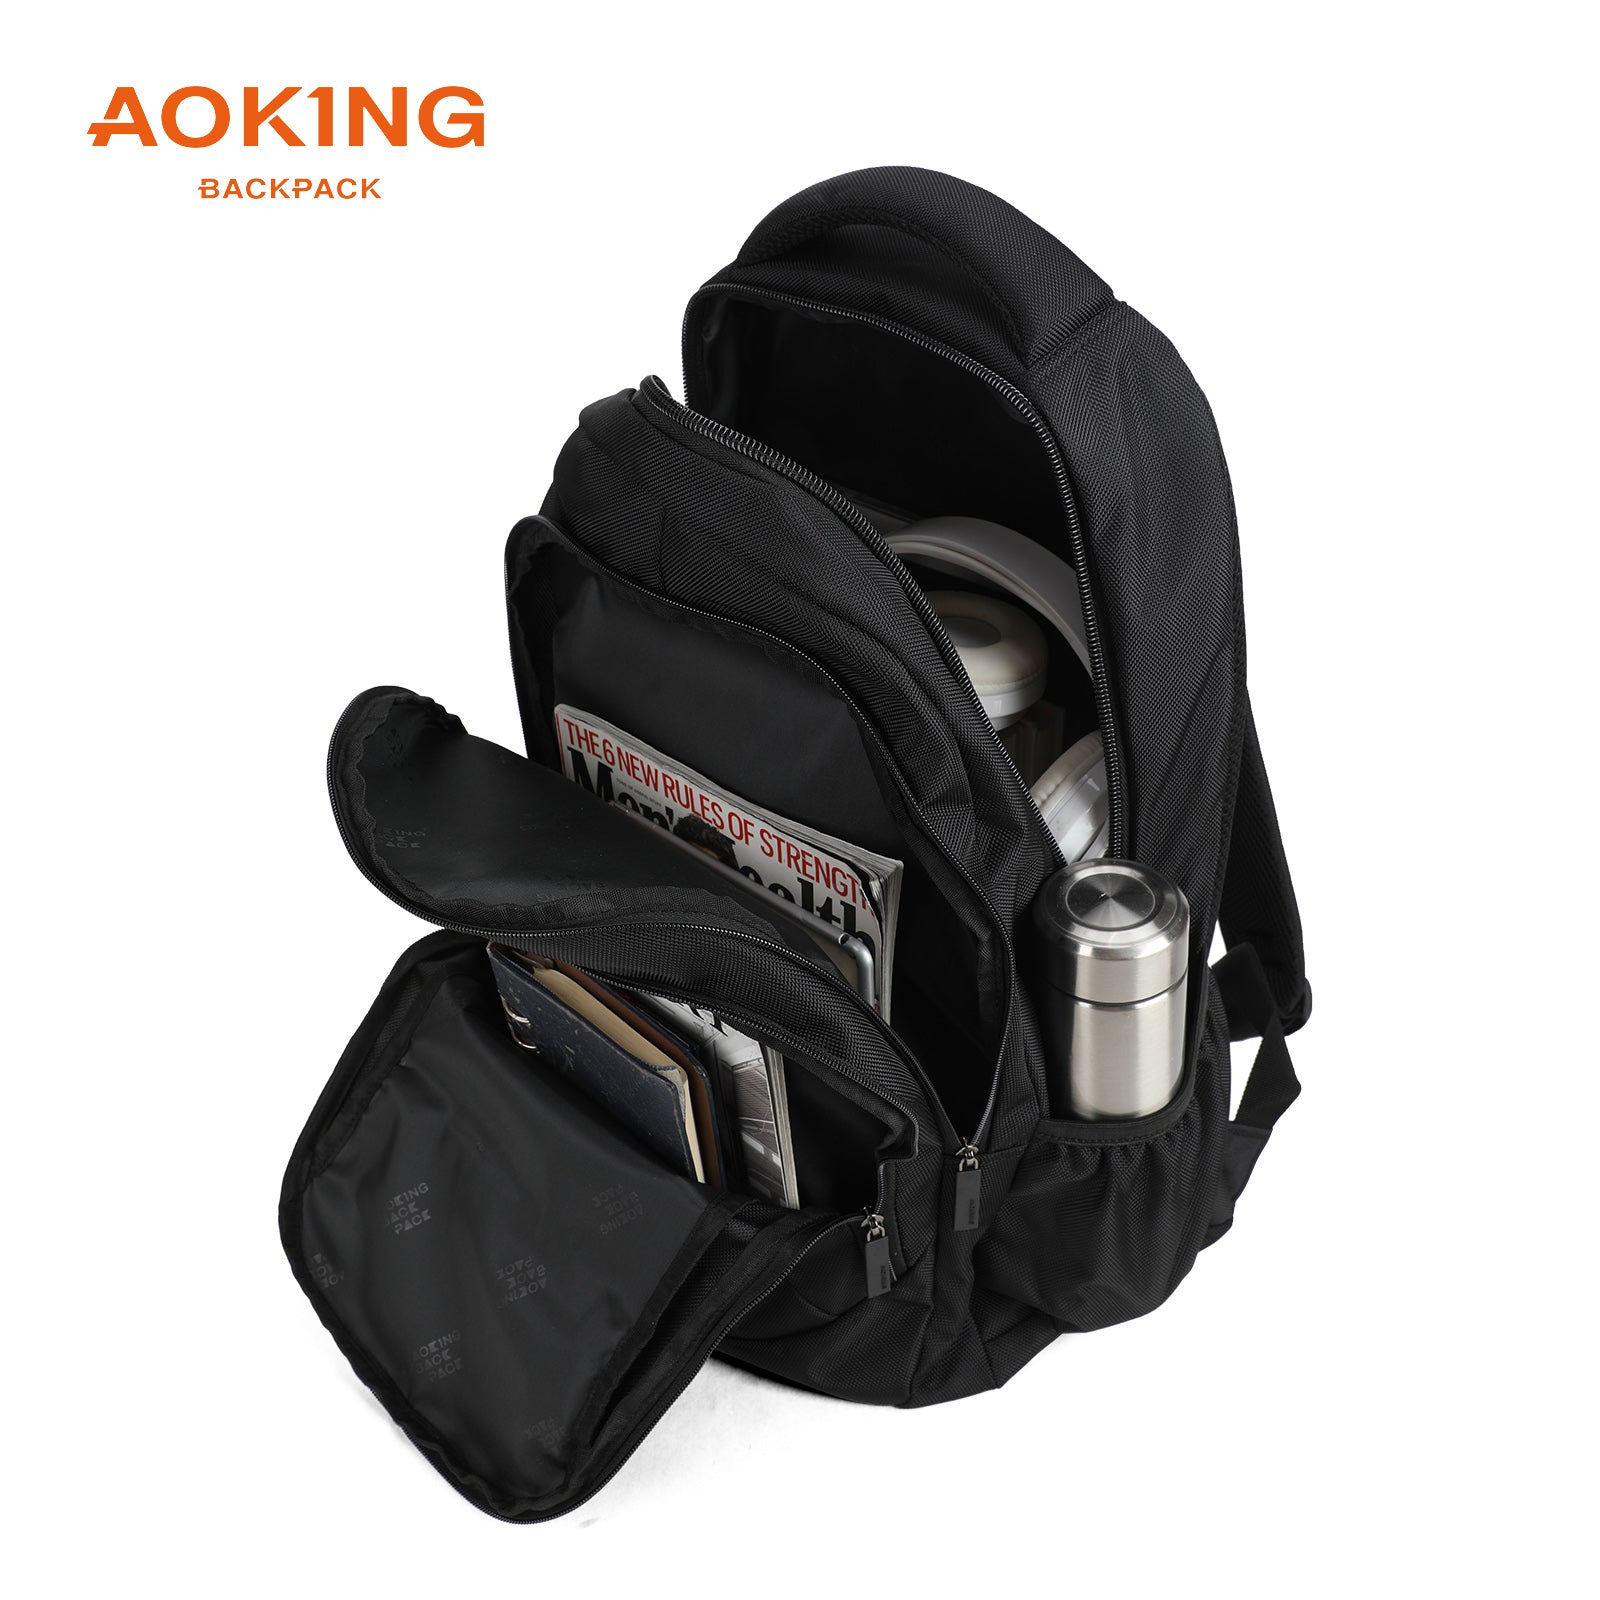 Aoking Classic Laptop Business Backpack H97067